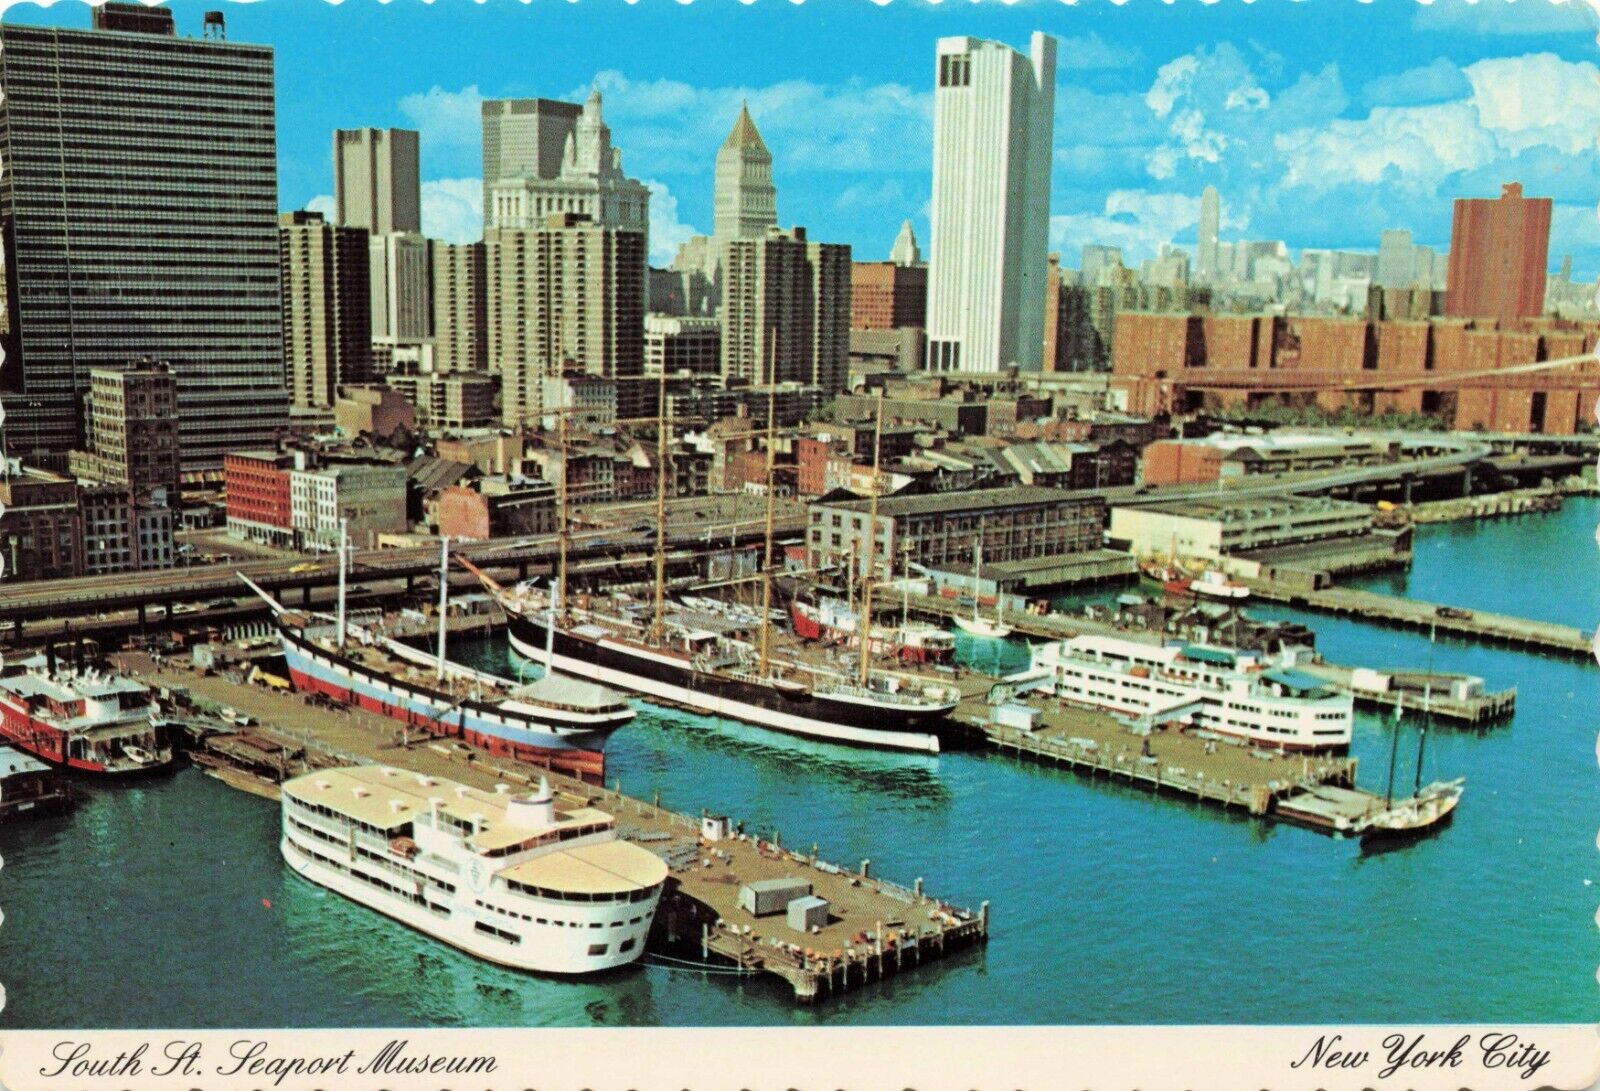 Postcard New York City's South Street Seaport Museum and Street of Shops VTG